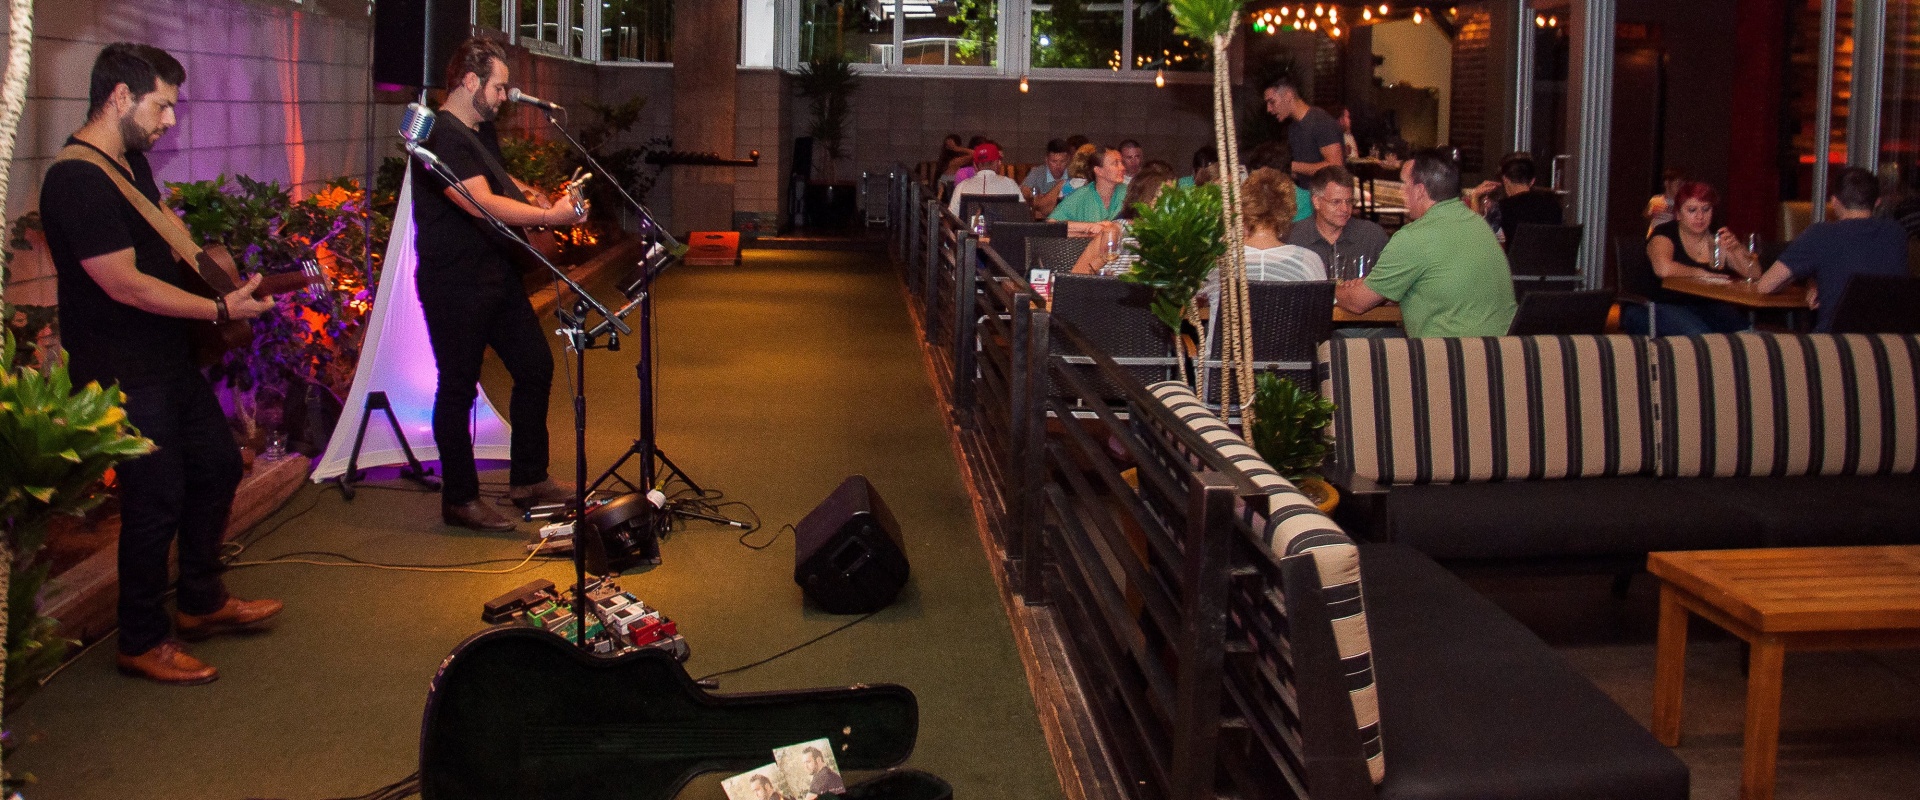 Live Music Venues in Scottsdale, Arizona: The Best Places to Enjoy a Live Performance